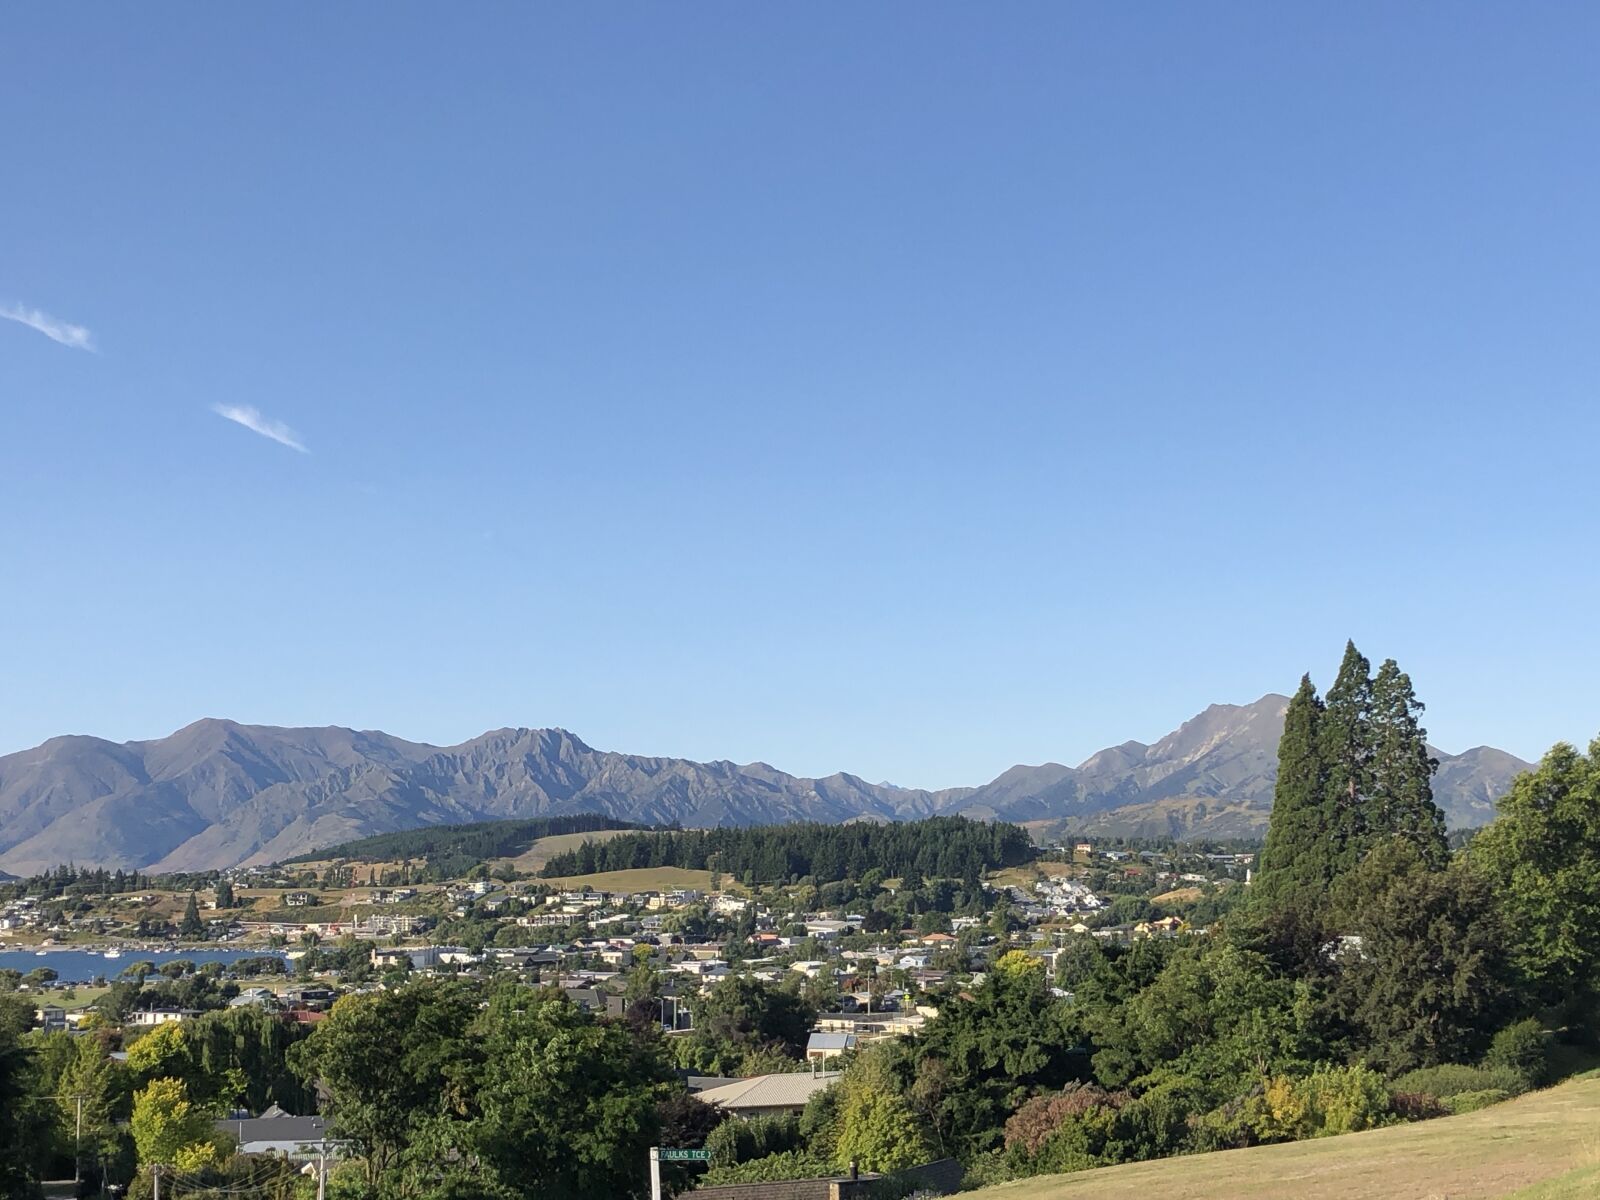 iPhone 8 Plus back dual camera 3.99mm f/1.8 sample photo. View, mountain, nz photography